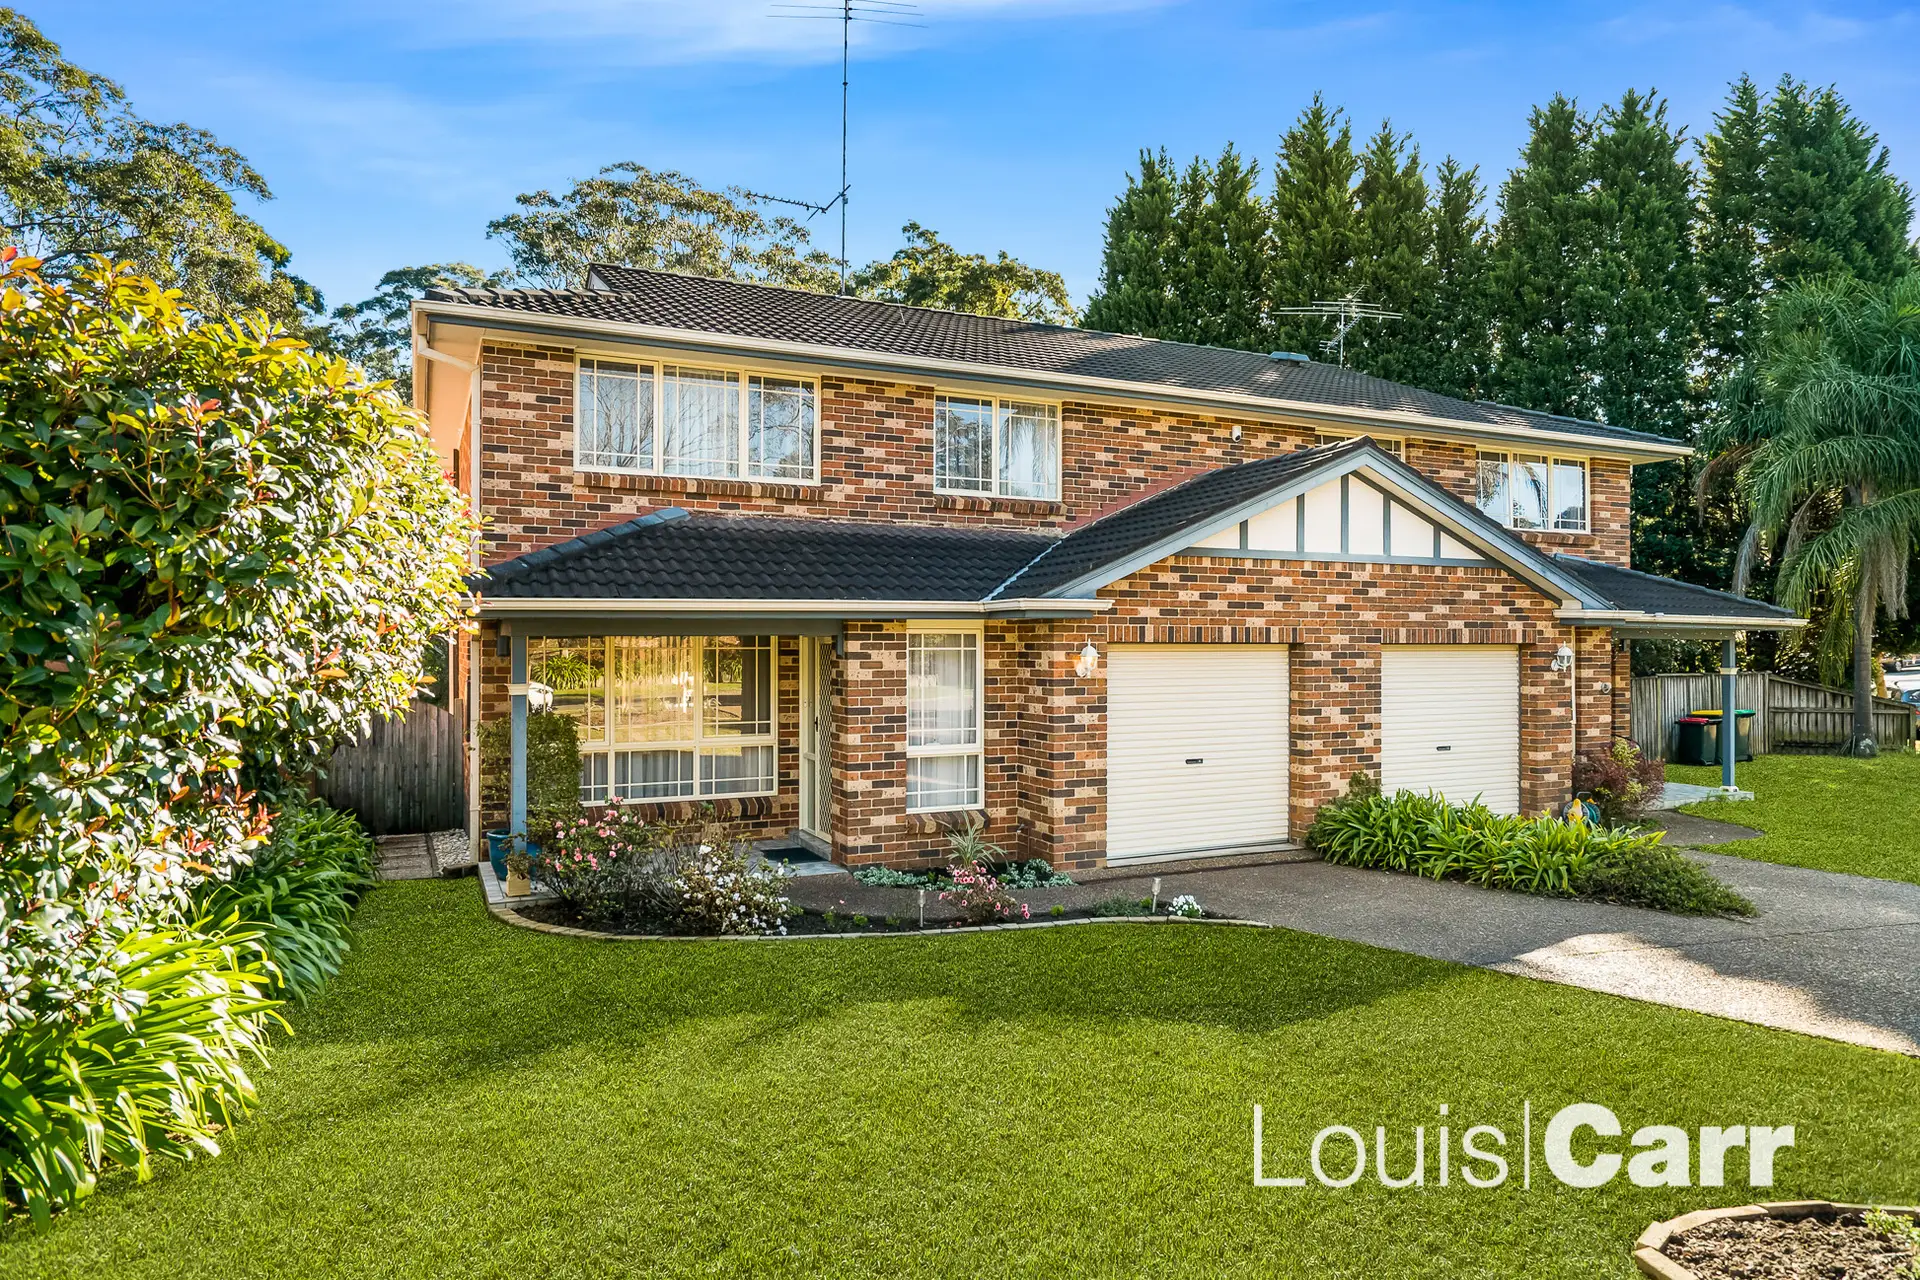 Photo #1: 1/51 Darlington Drive, Cherrybrook - Sold by Louis Carr Real Estate